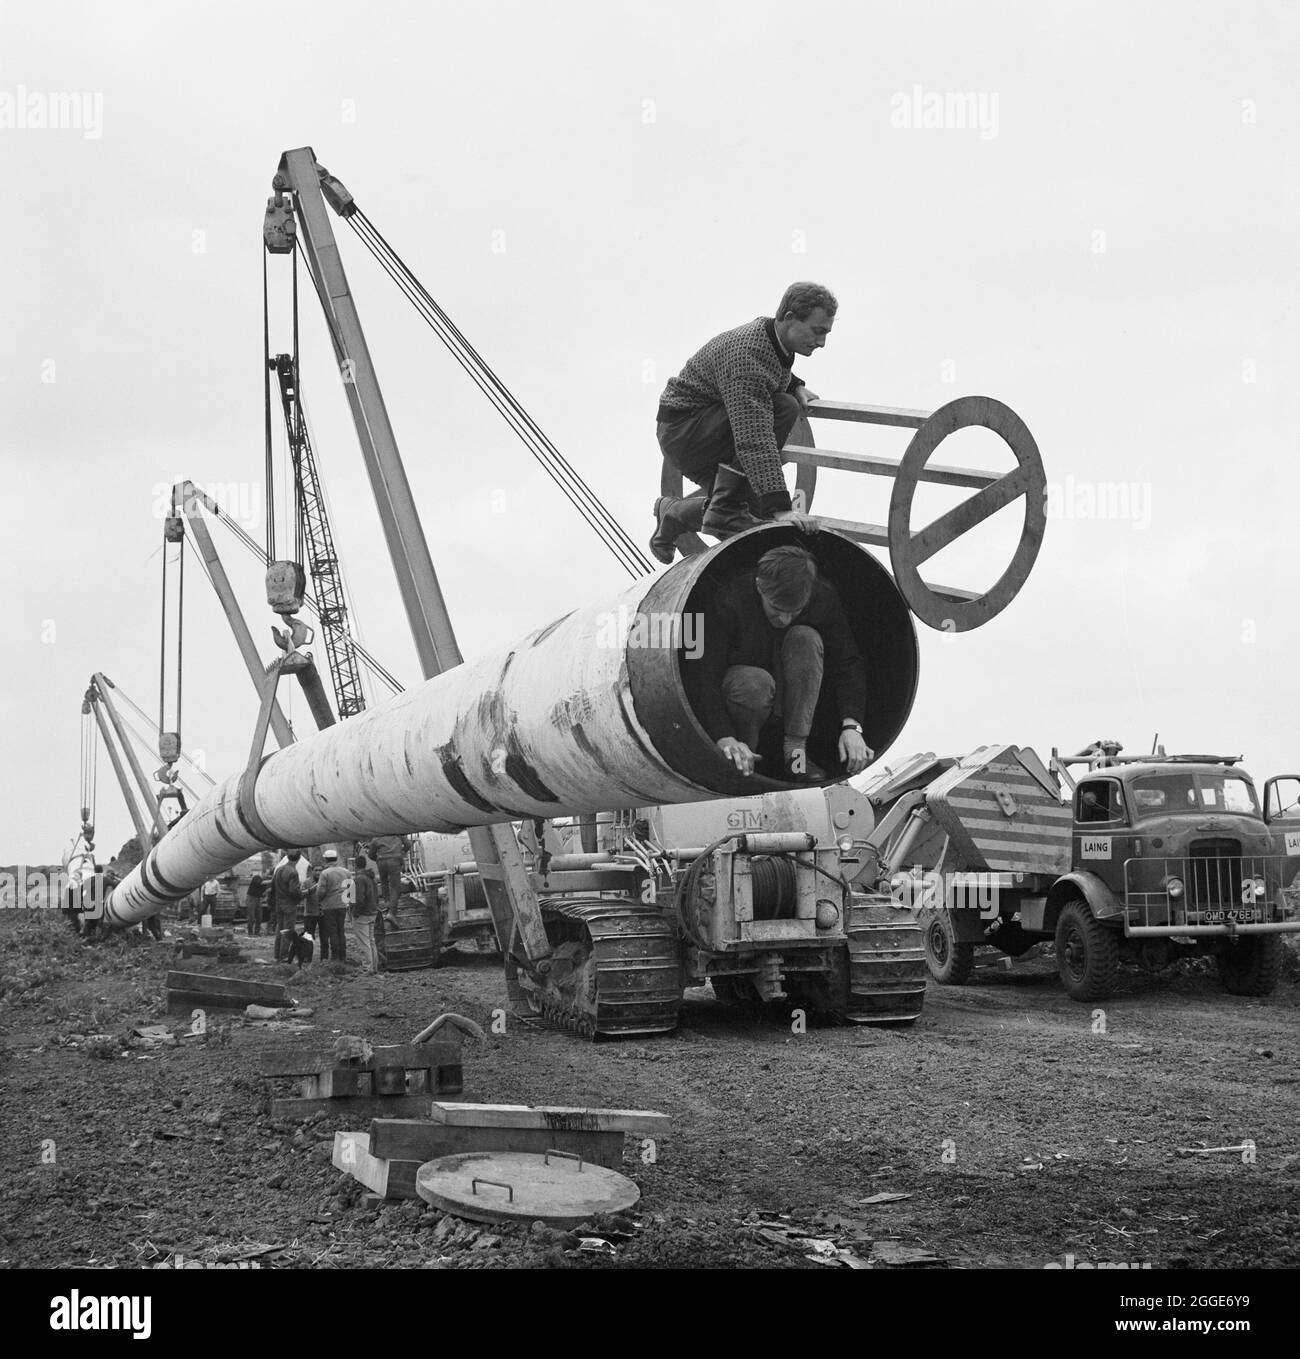 The Fens gas pipeline being lifted by a row of Caterpillar 583 pipelayers, with two workers crouched at one end of the pipe. Work on laying the Fens gas pipeline started in June 1967 and was a joint venture between Laing Civil Engineering and French companies Entrepose and Grands Travaux de Marseille (GTM) for the Gas Council. Over 600 men worked on the project to lay 36 inch diameter steel pipes starting at West Winch in Norfolk and running to where it linked up with the next contract at Woodcroft Castle in Cambridgeshire. The pipeline crossed four rivers and numerous dykes and ditches. This Stock Photo